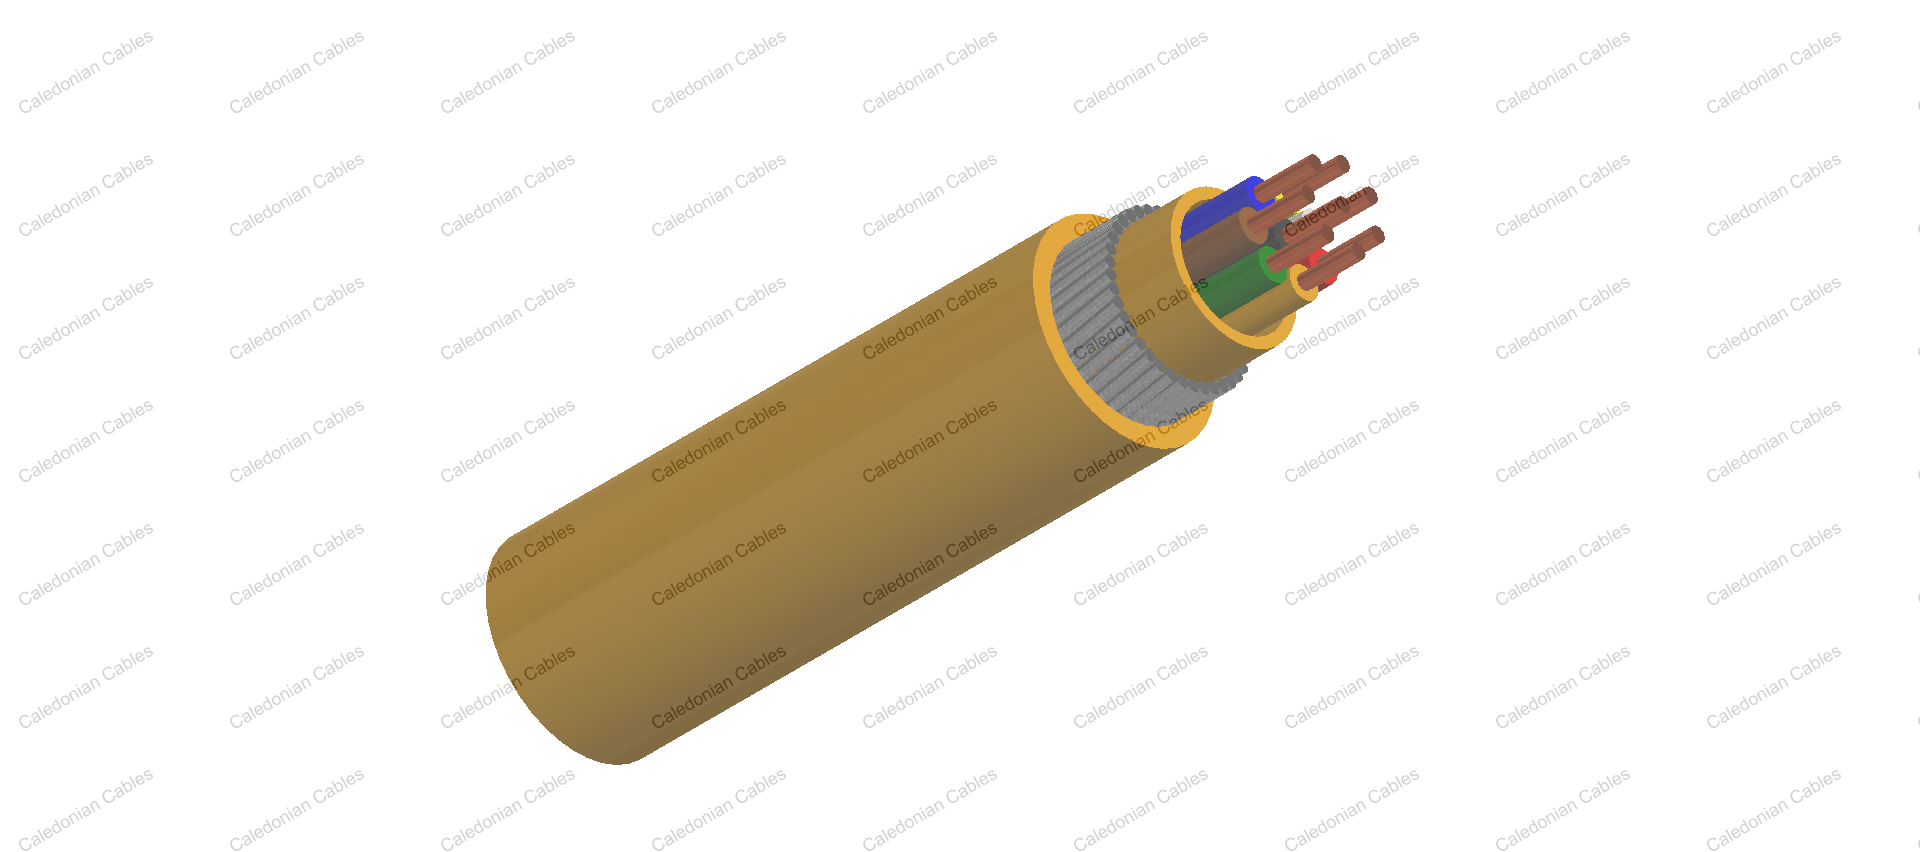 Traffic Signal Cable to BS 6346